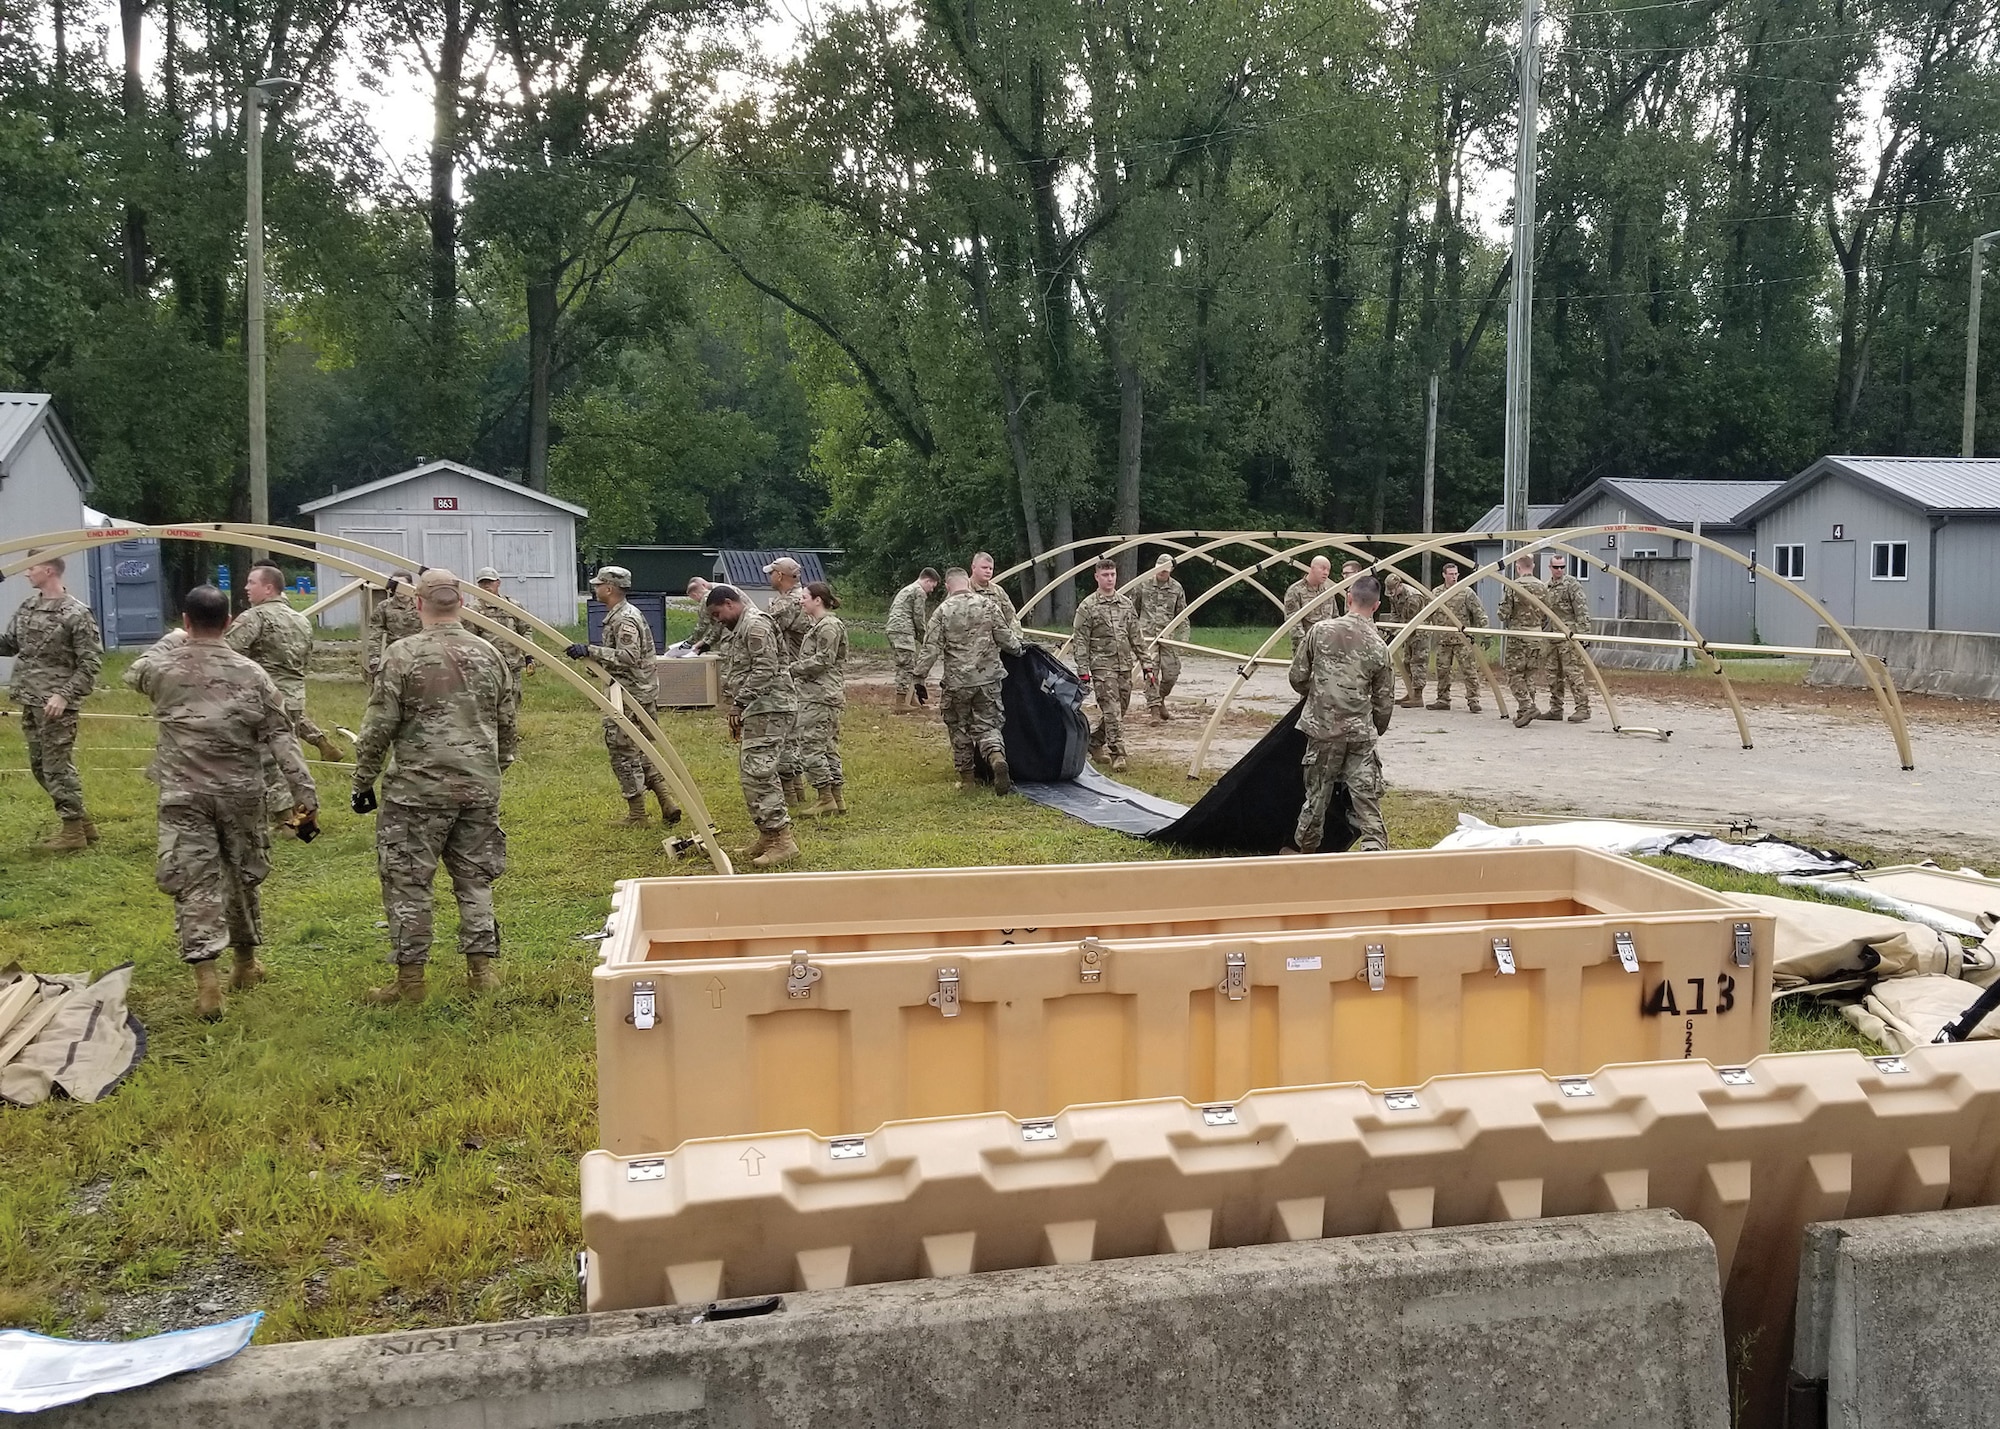 Airmen from the 445th Civil Engineer Squadron erect a small scale tent city to simulate operations in a bare-base environment during a field training exercise at the Wright-Patterson Air Force Base Warfighter Training Center, Sept. 8, 2022.